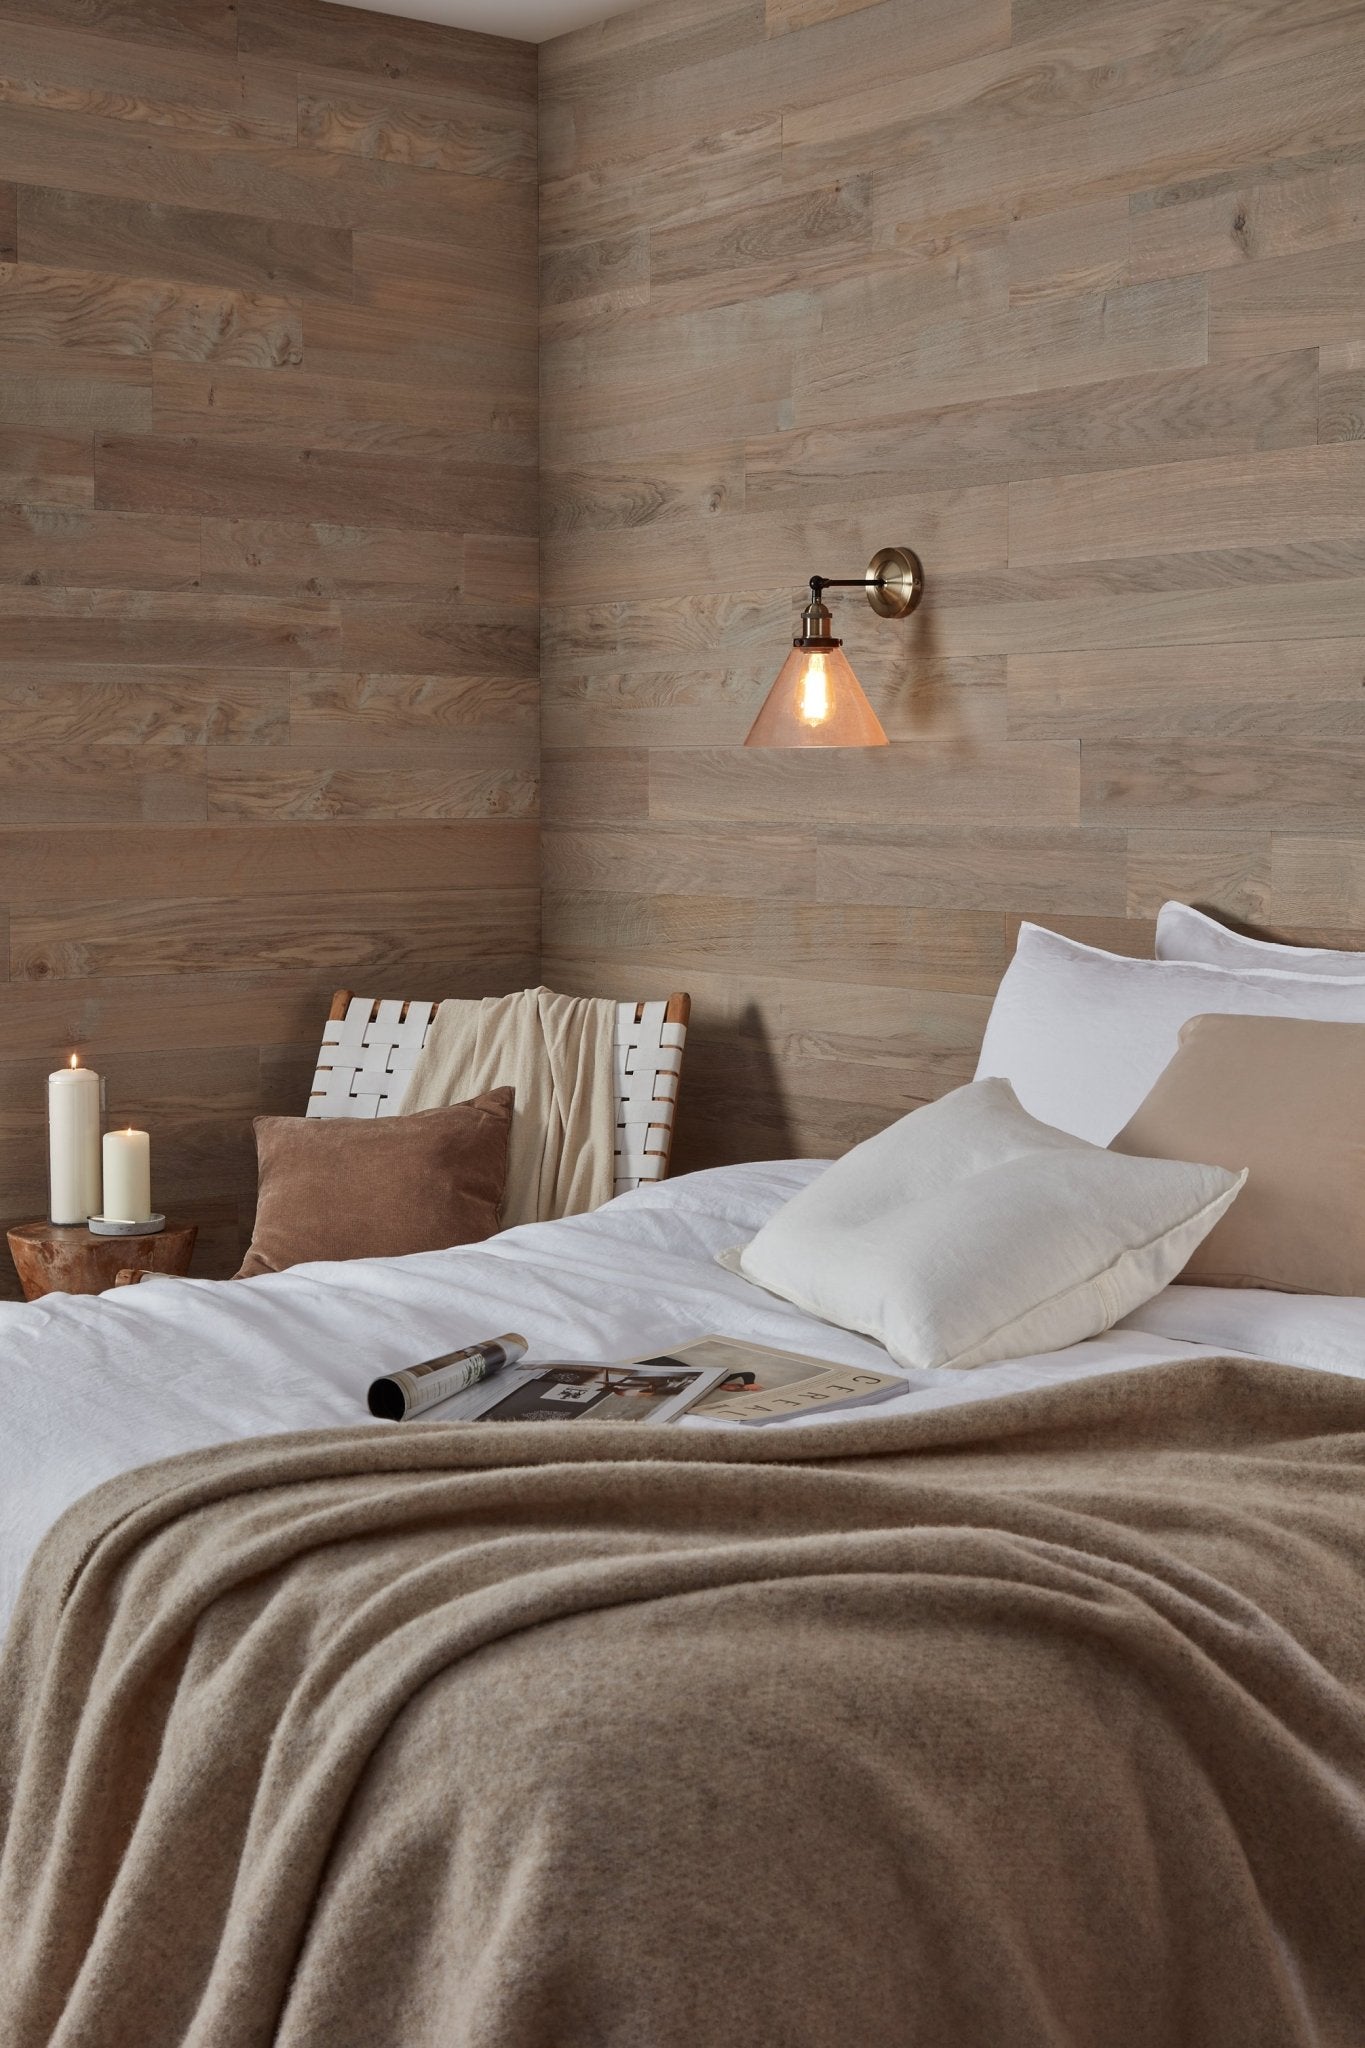 Naturewall Self-adhesive planks use to decorate a bedroom wall